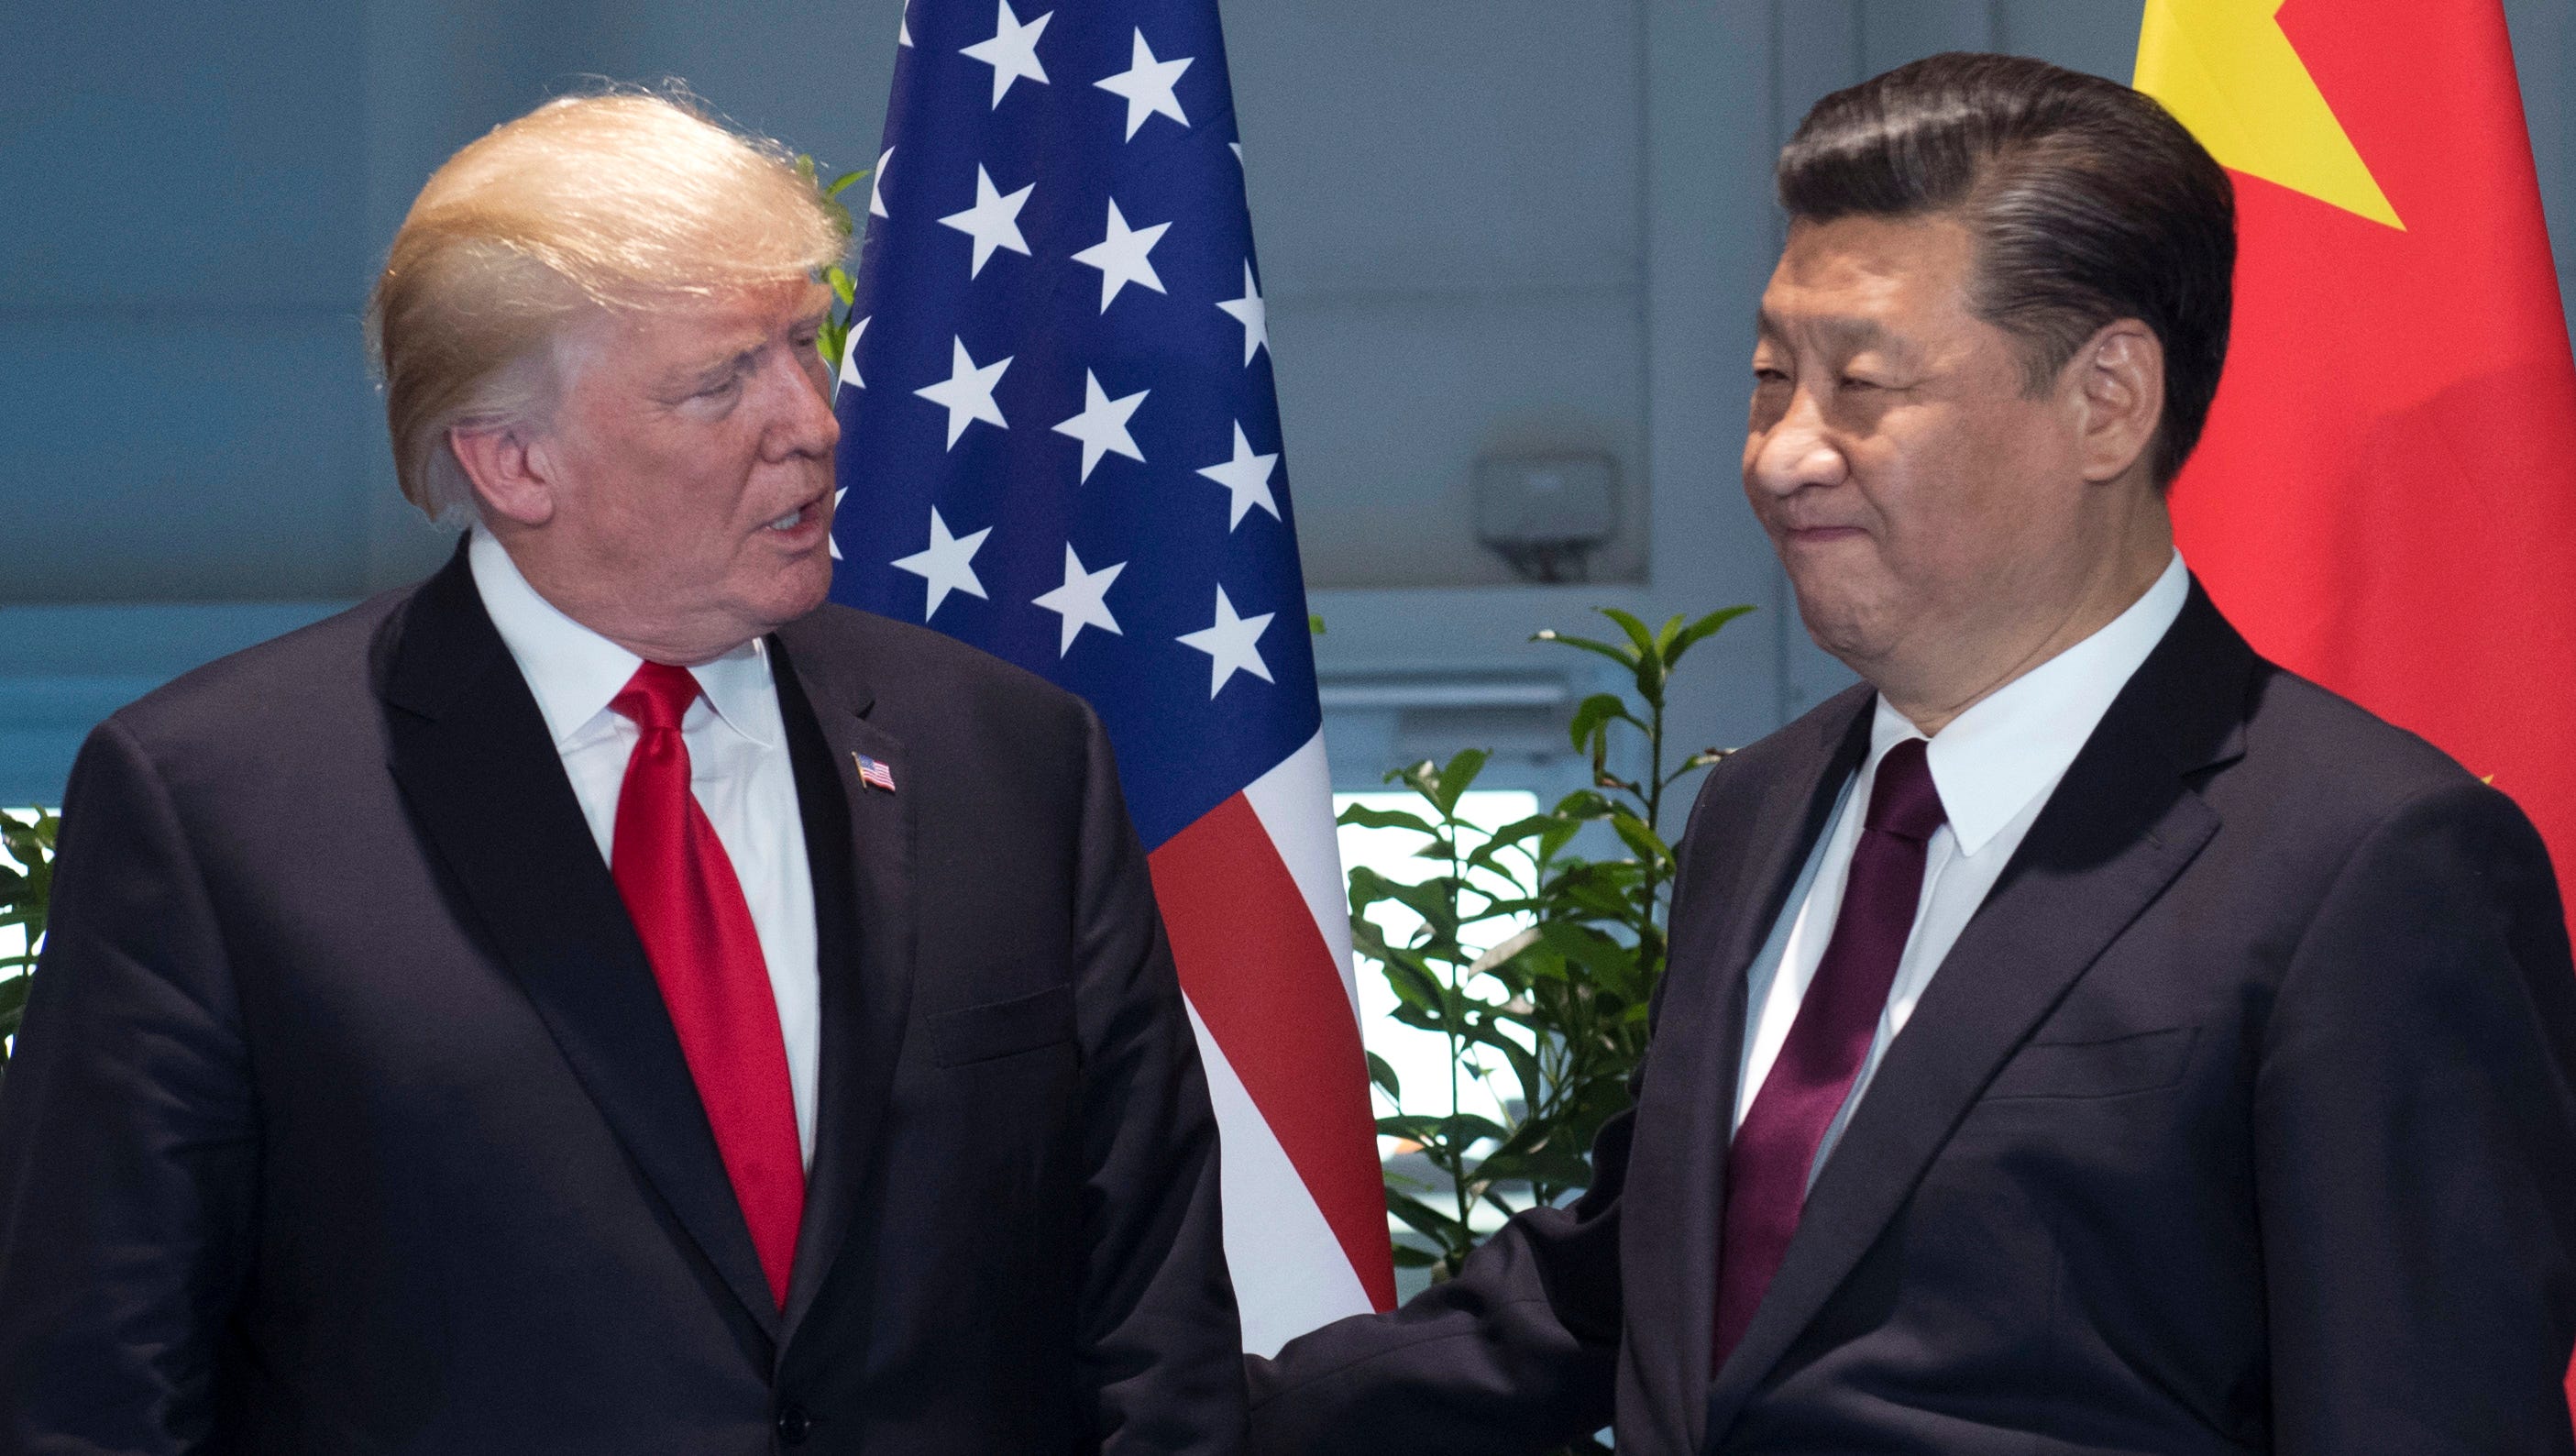 donald-trump-is-handing-wins-to-chinese-president-xi-jinping